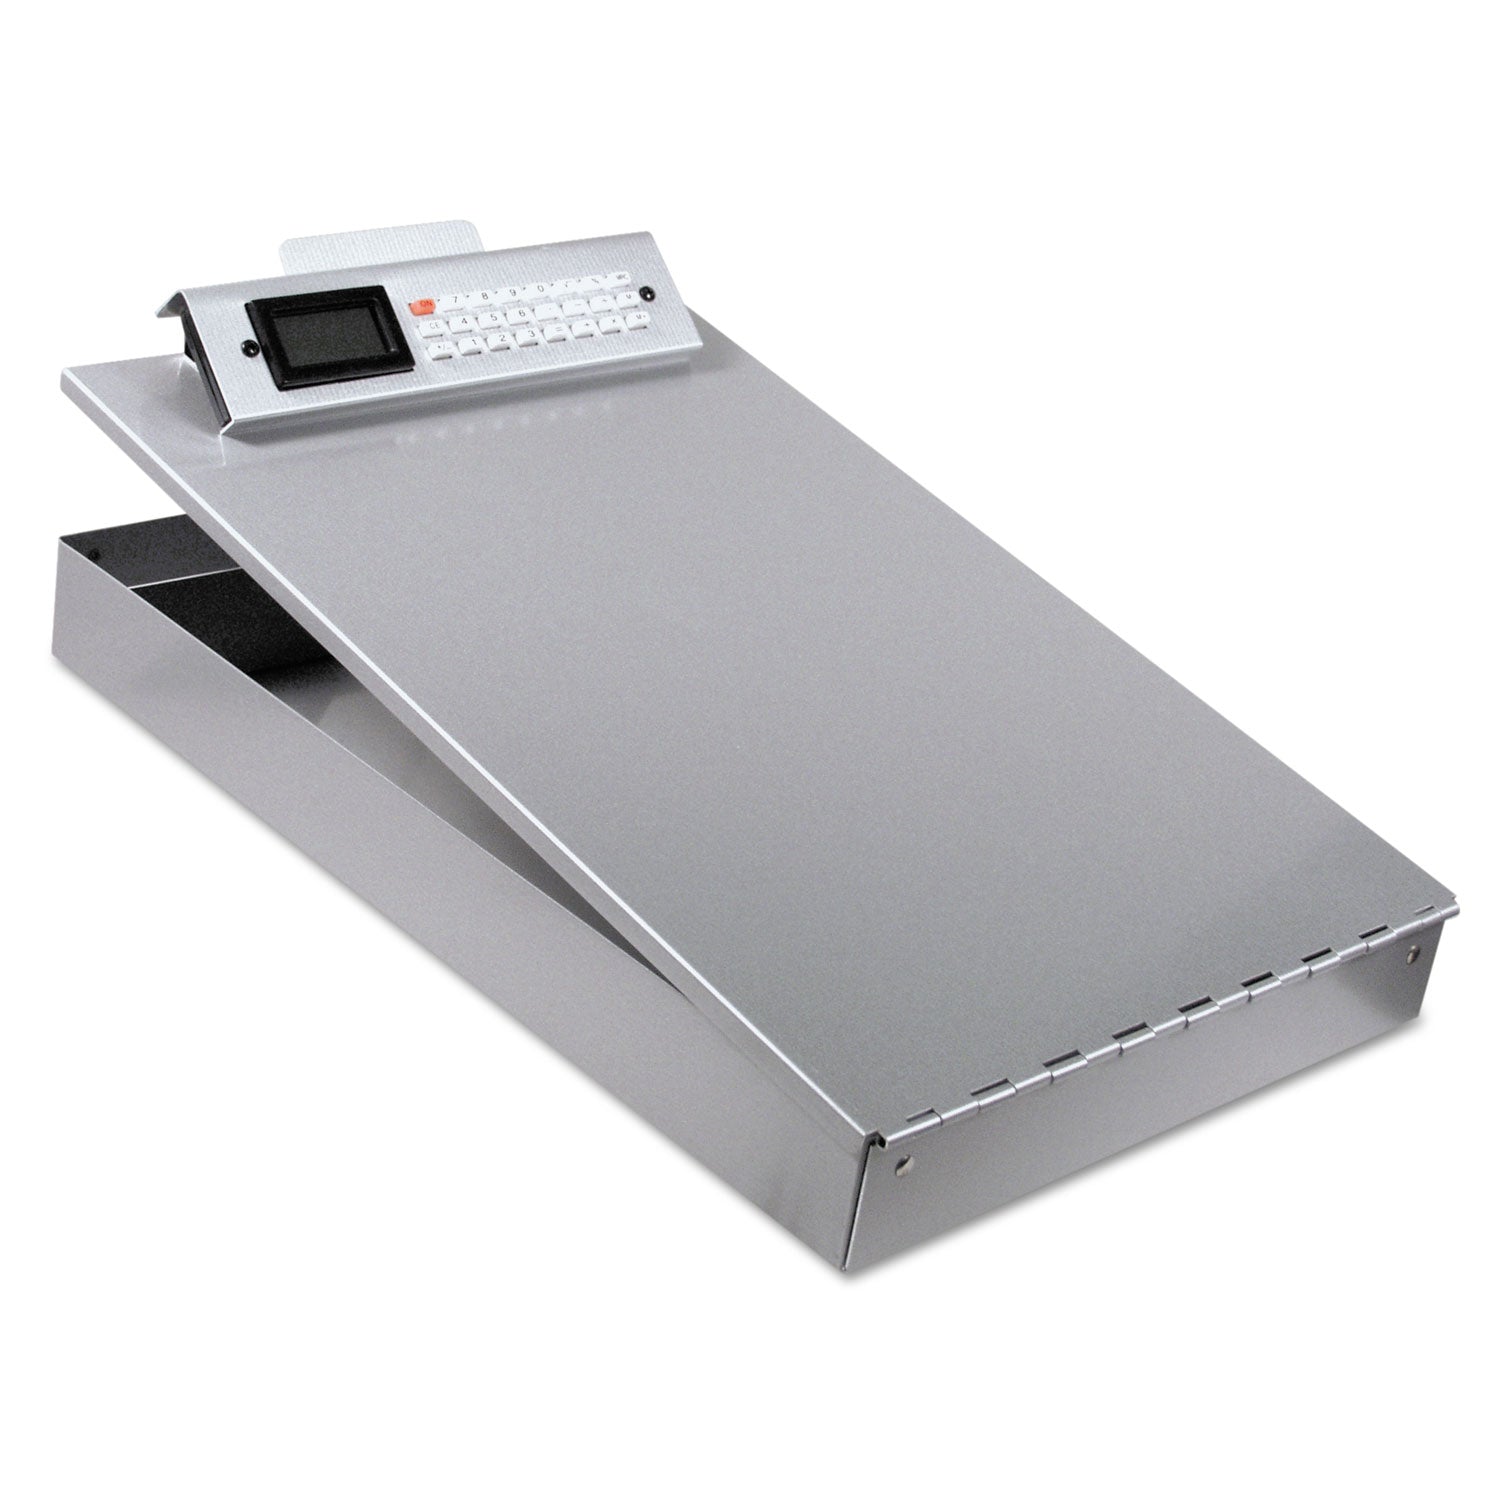 Redi-Rite Aluminum Storage Clipboard with Calculator, 1" Clip Capacity, Holds 8.5 x 11 Sheets, Silver - 